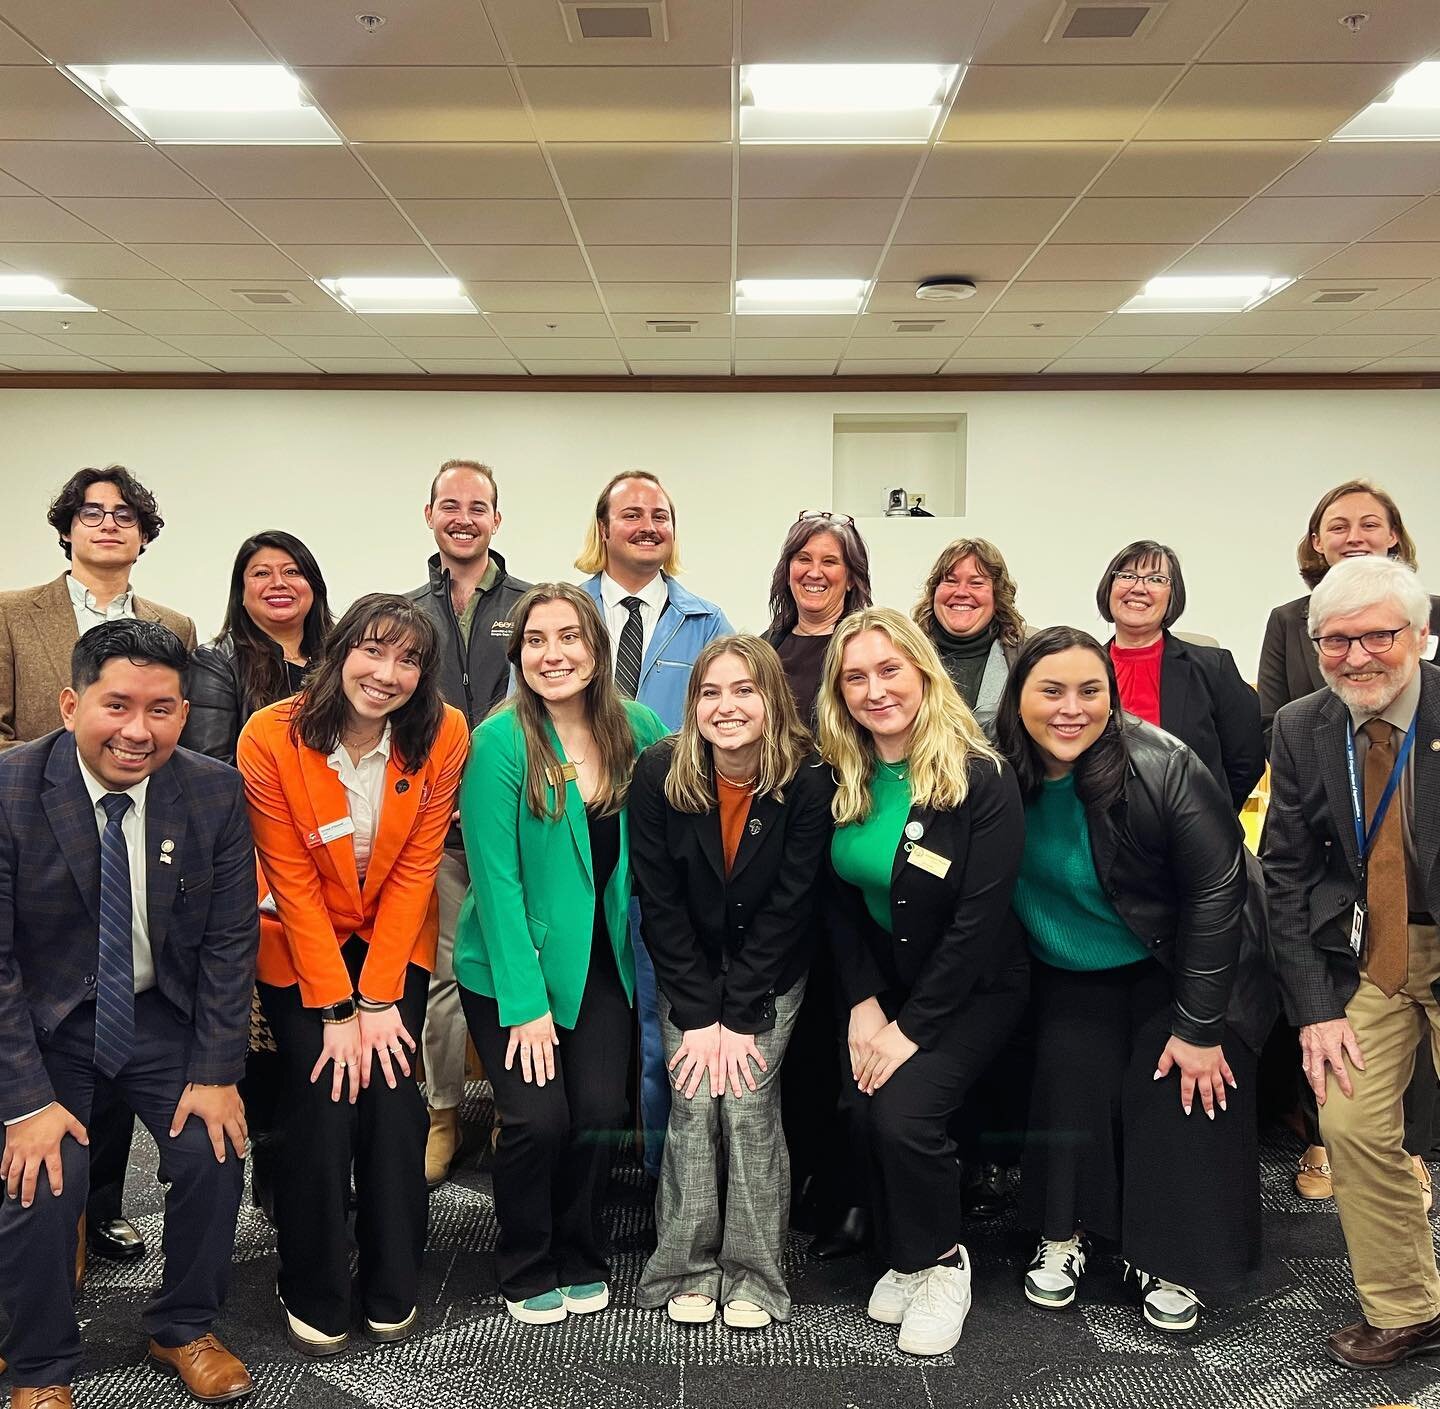 Earlier this month, HB 4162: The Student Emergency Needs Package had a public hearing in the House Higher Education Committee. Students and advocates from across Oregon provided powerful testimony that resulted in the committee passing the bill out o